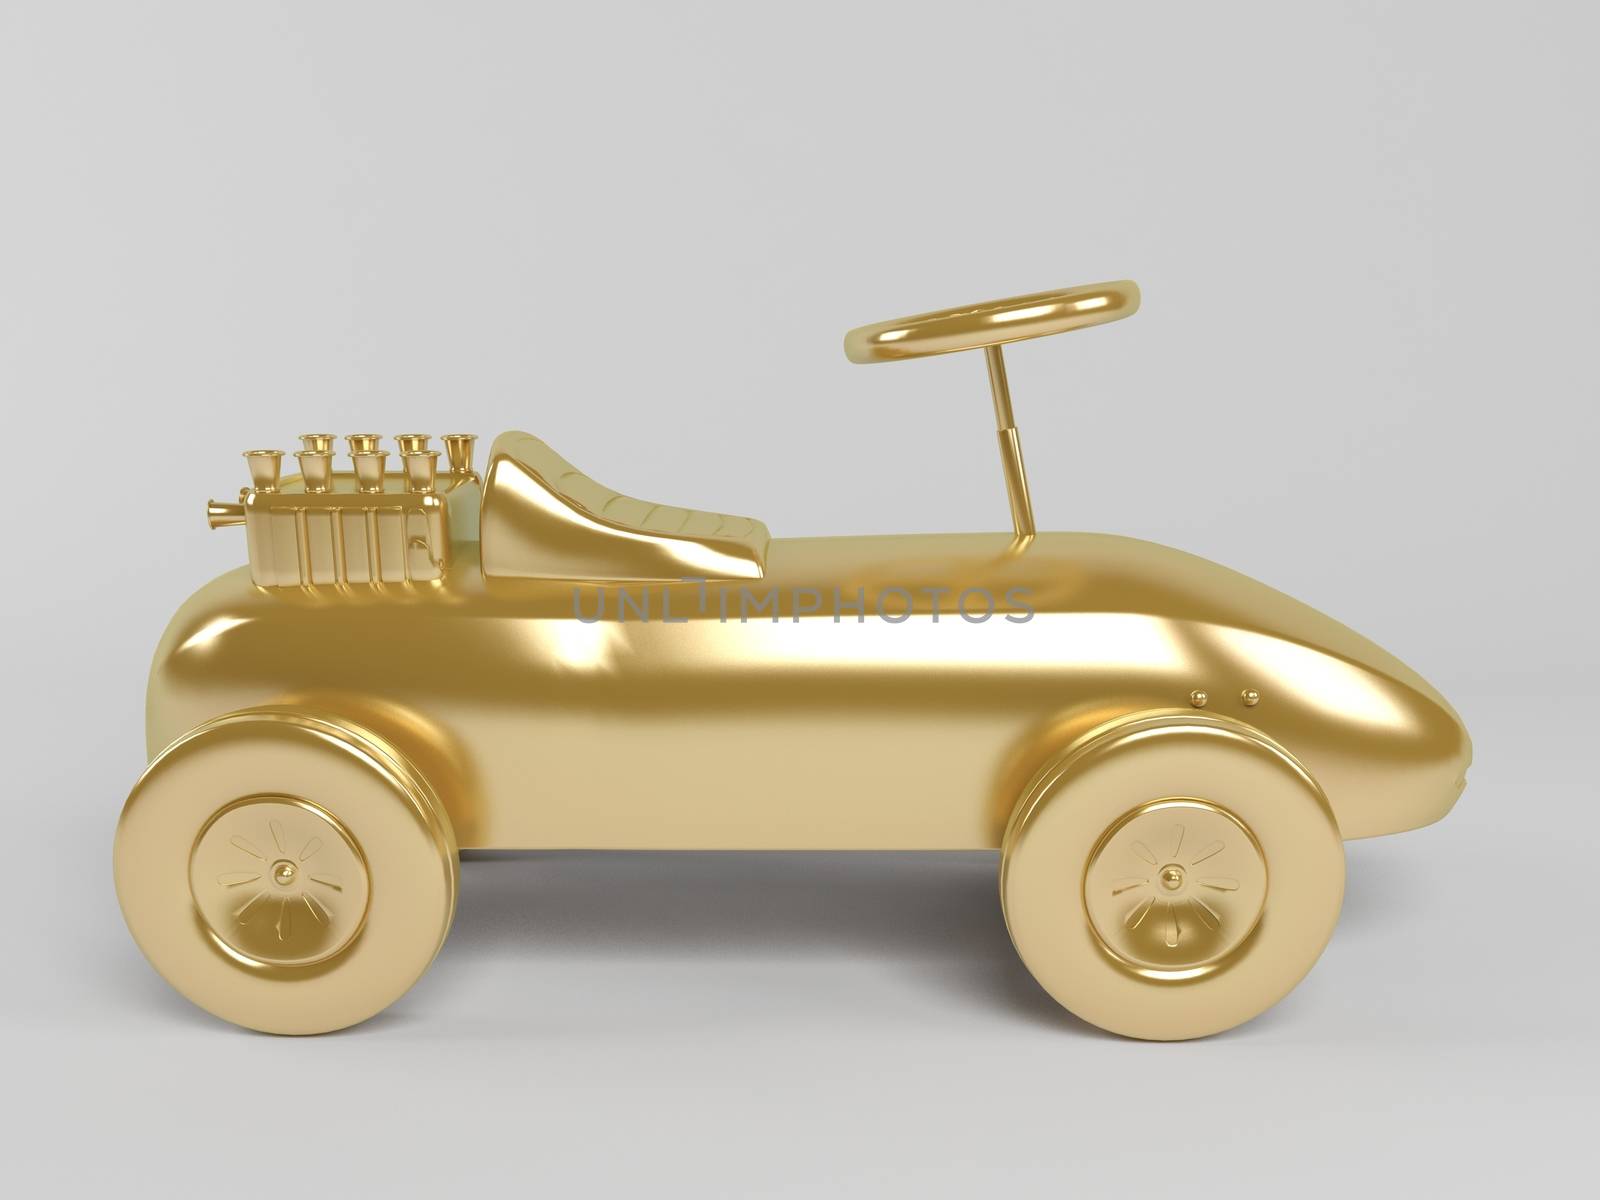 3d rendering of golden toy car isolated on white